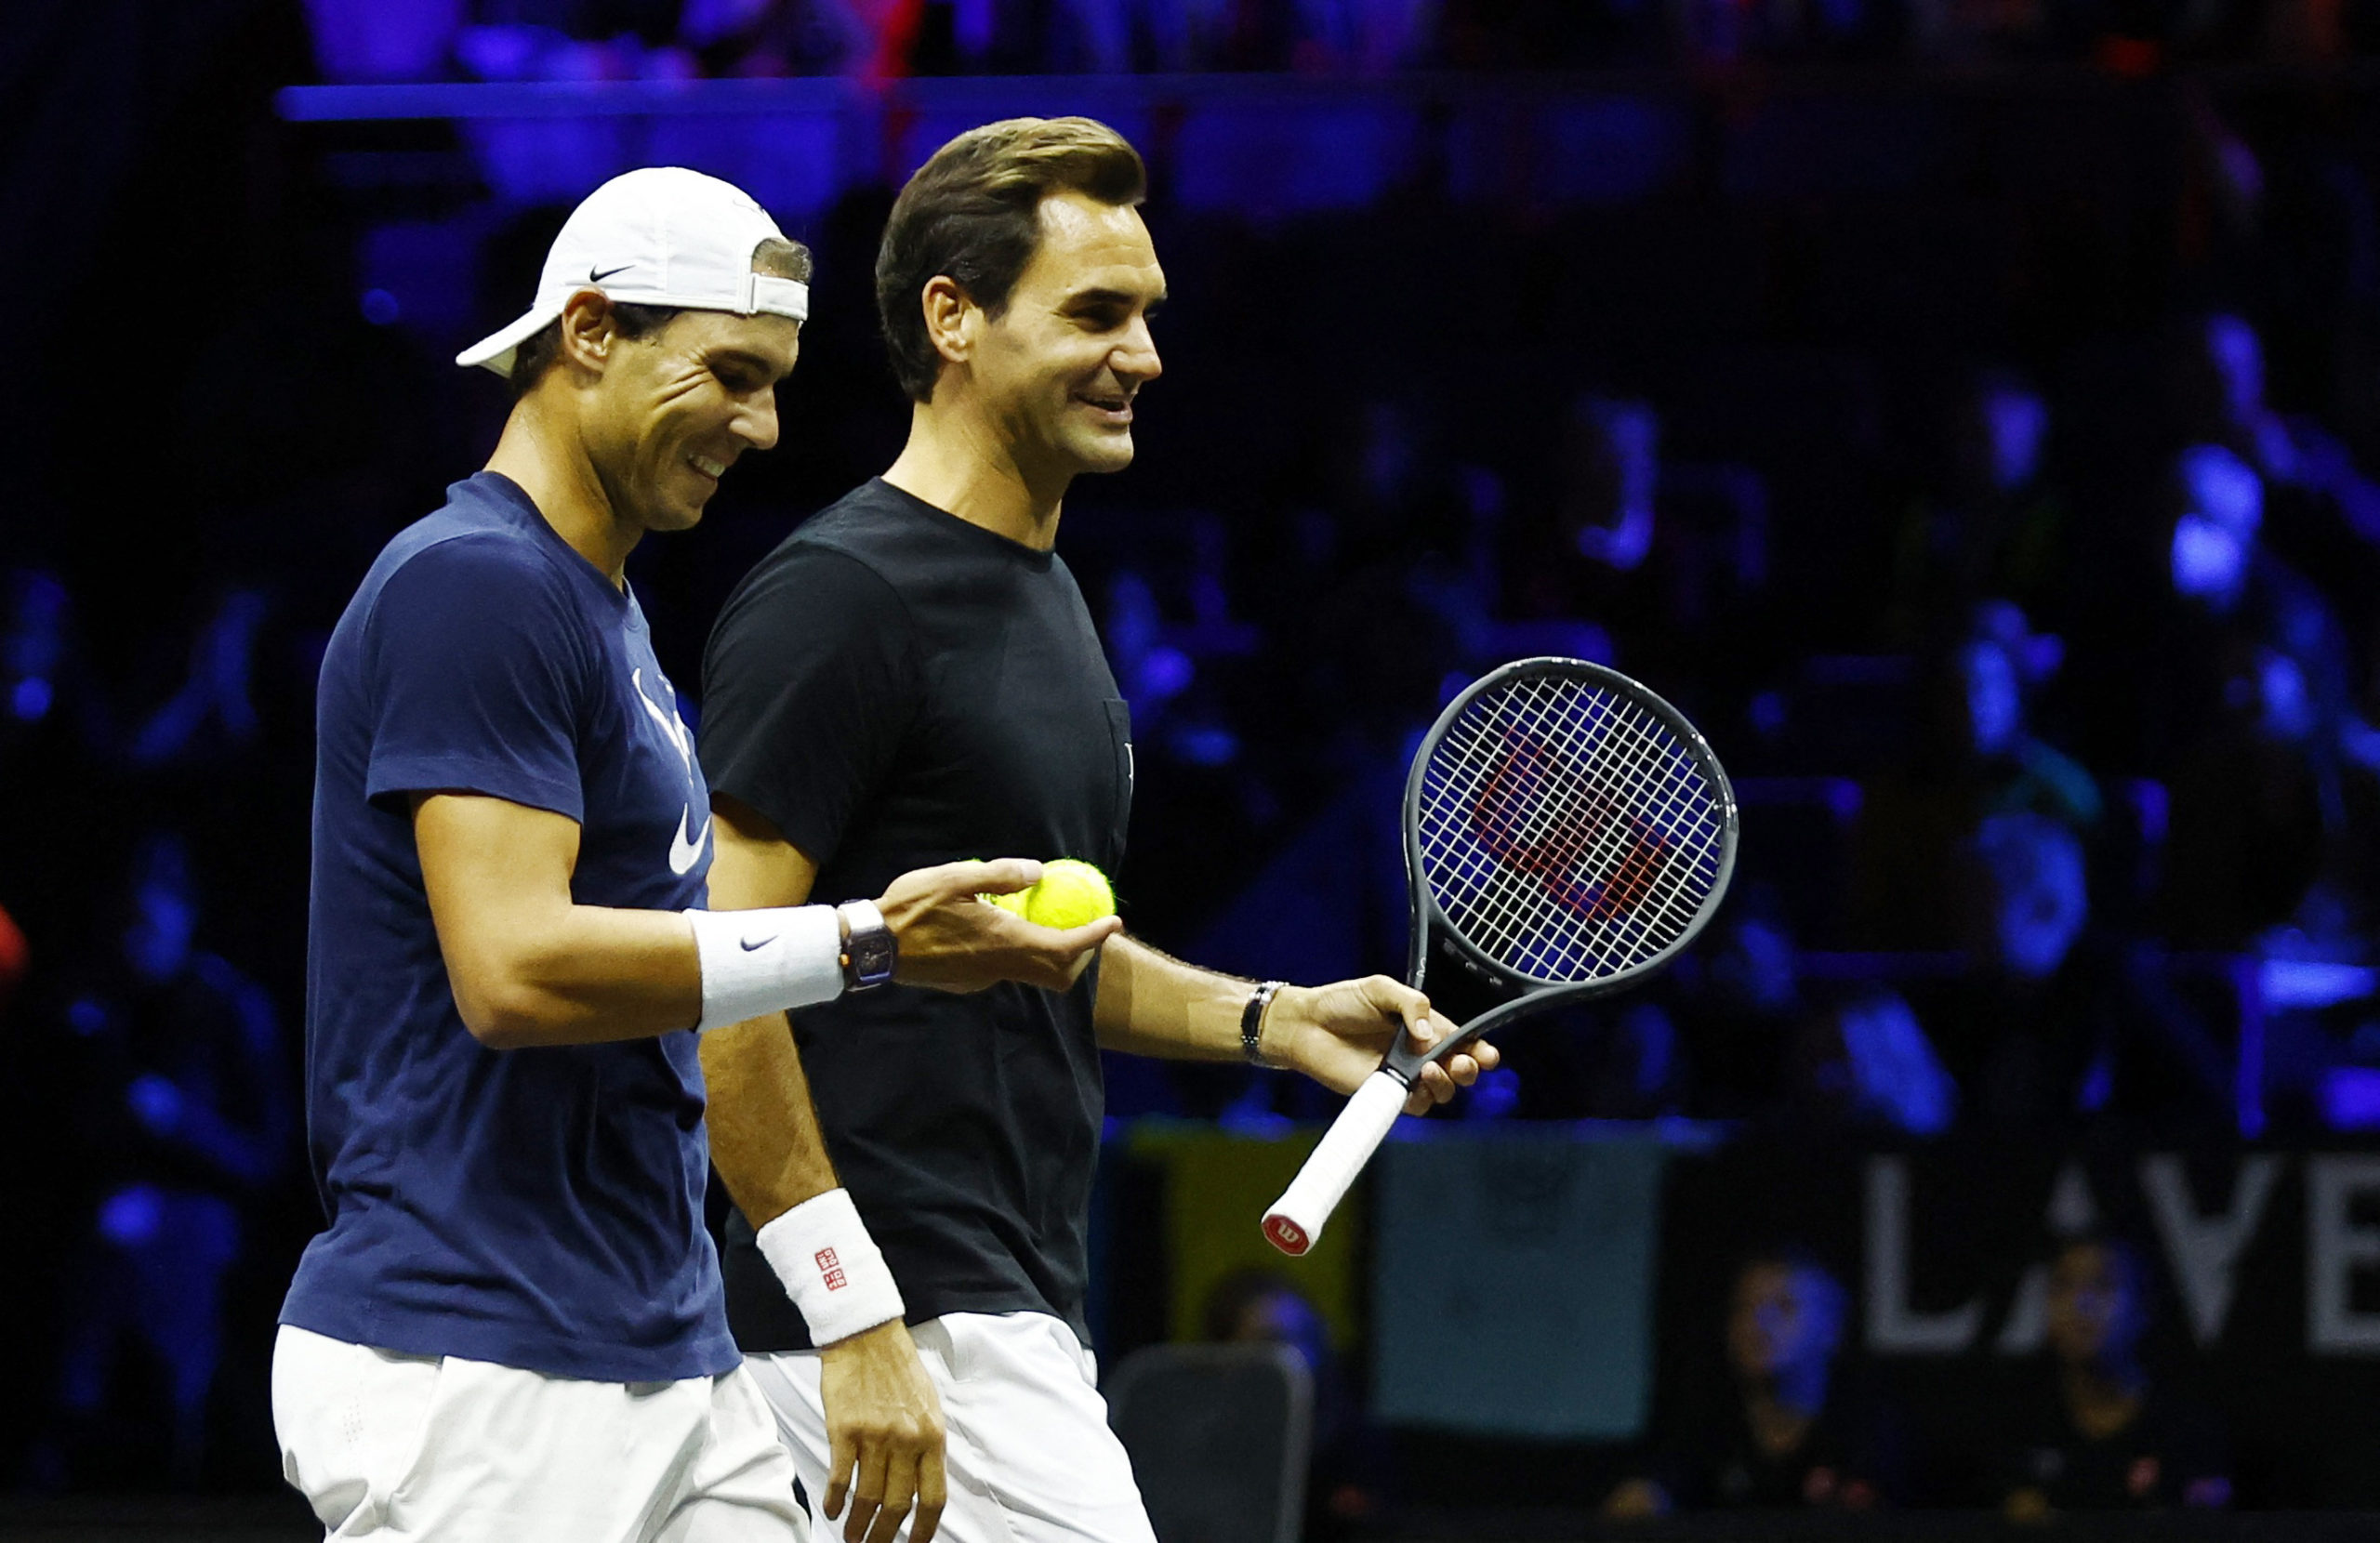 Tennis - Laver Cup - Media Day - 02 Arena, London, Britain - September 22, 2022 Team Europe's Roger Federer and Rafael Nadal during practice 